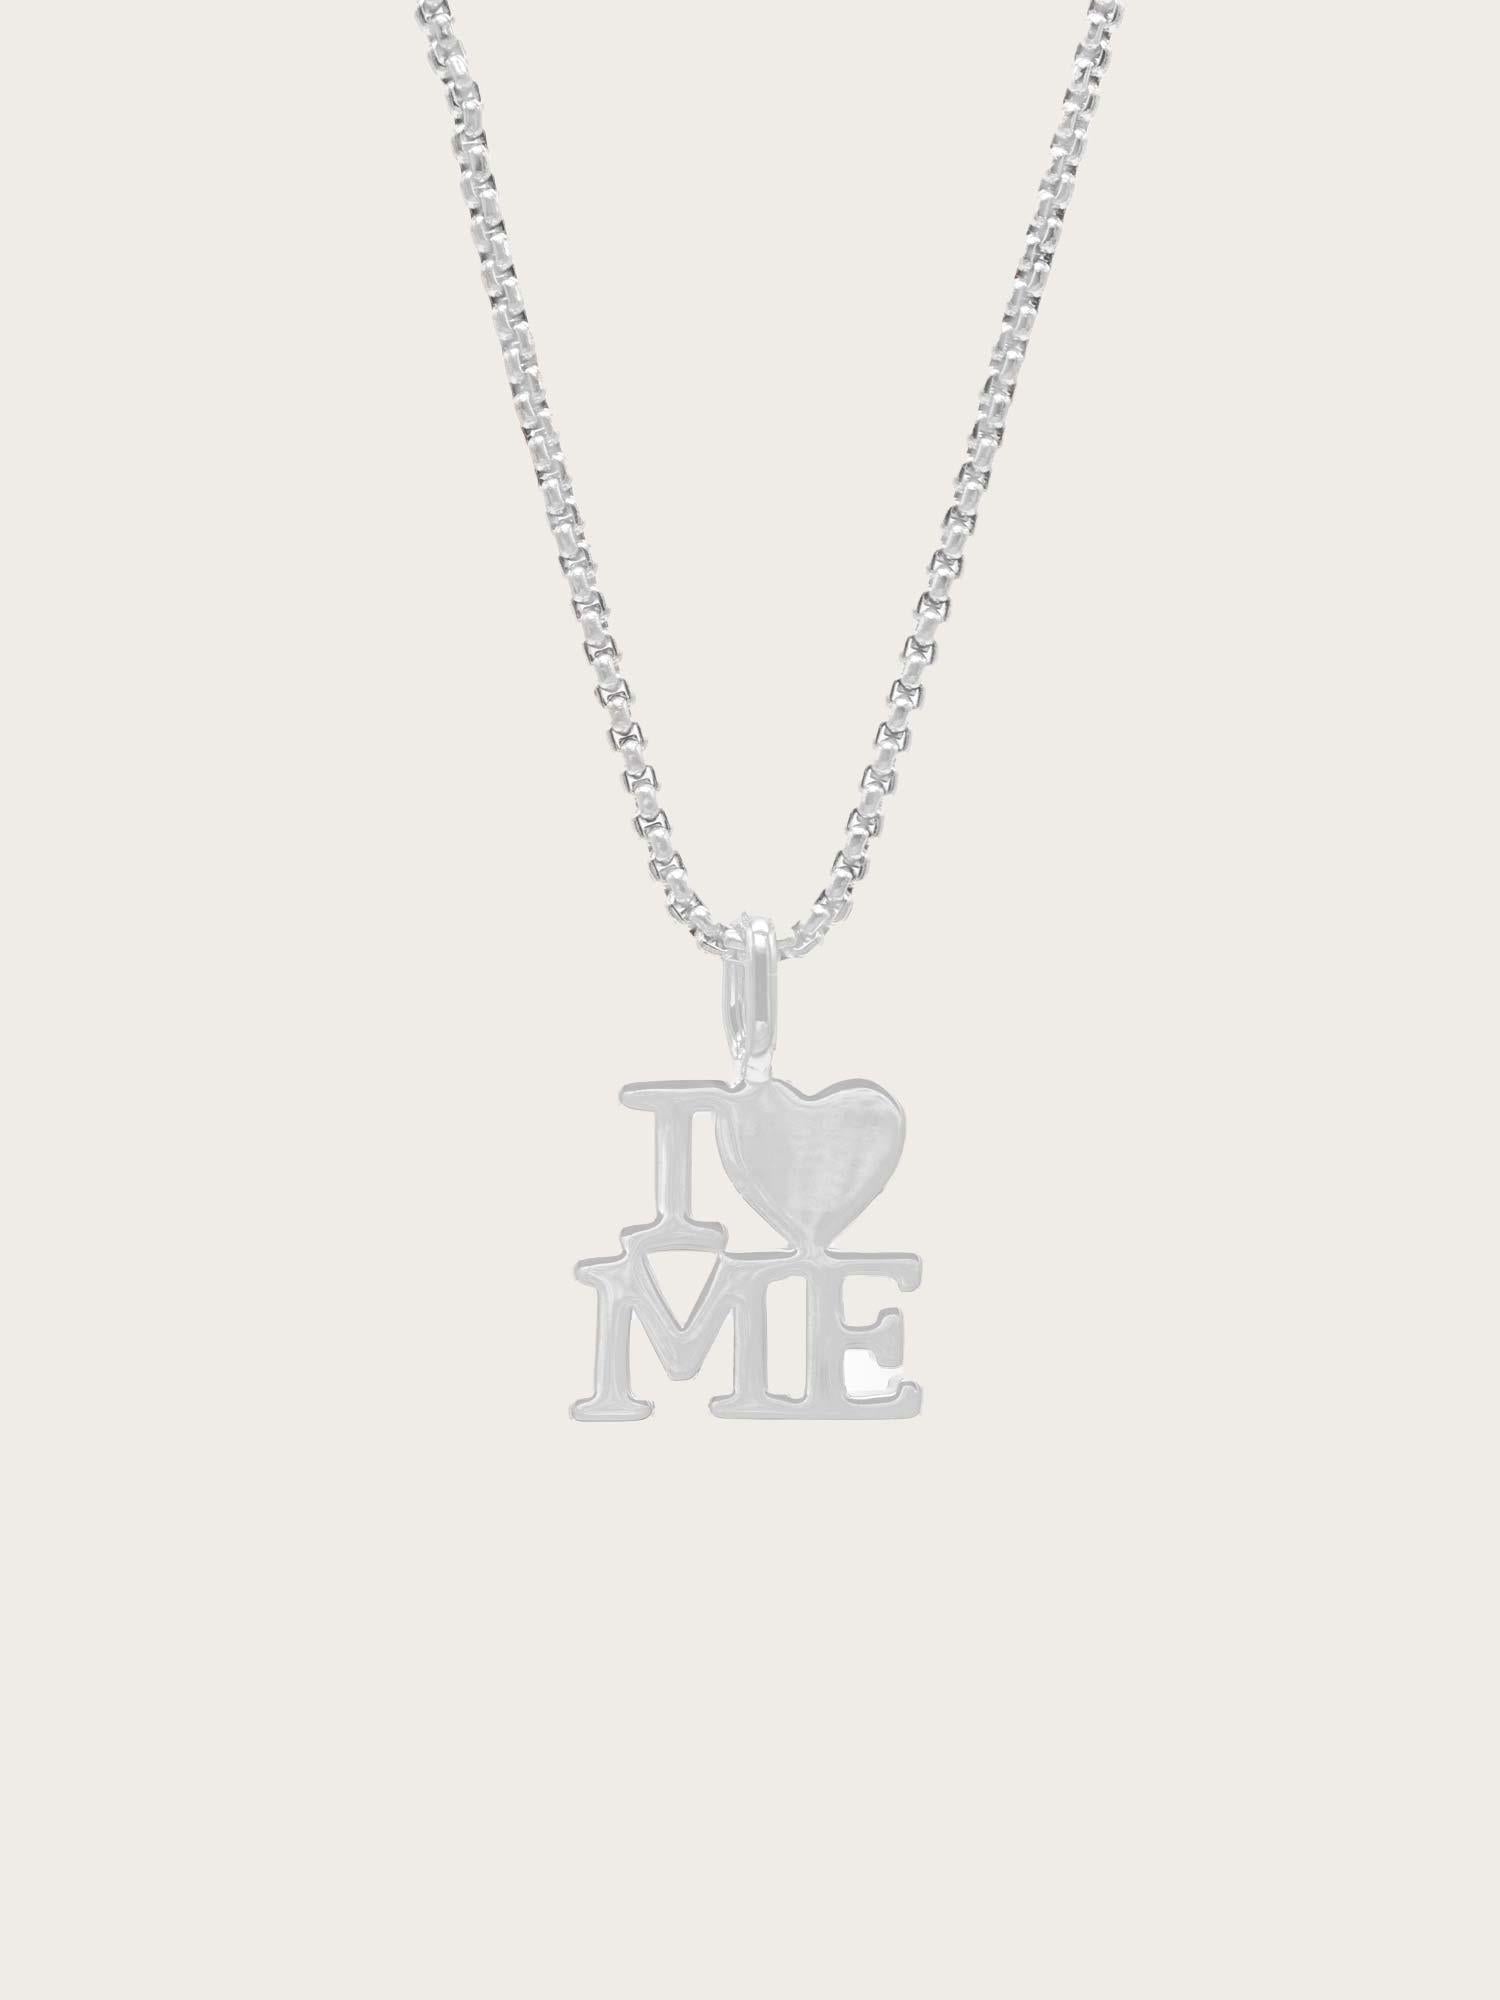 Love ME Necklace - Silver